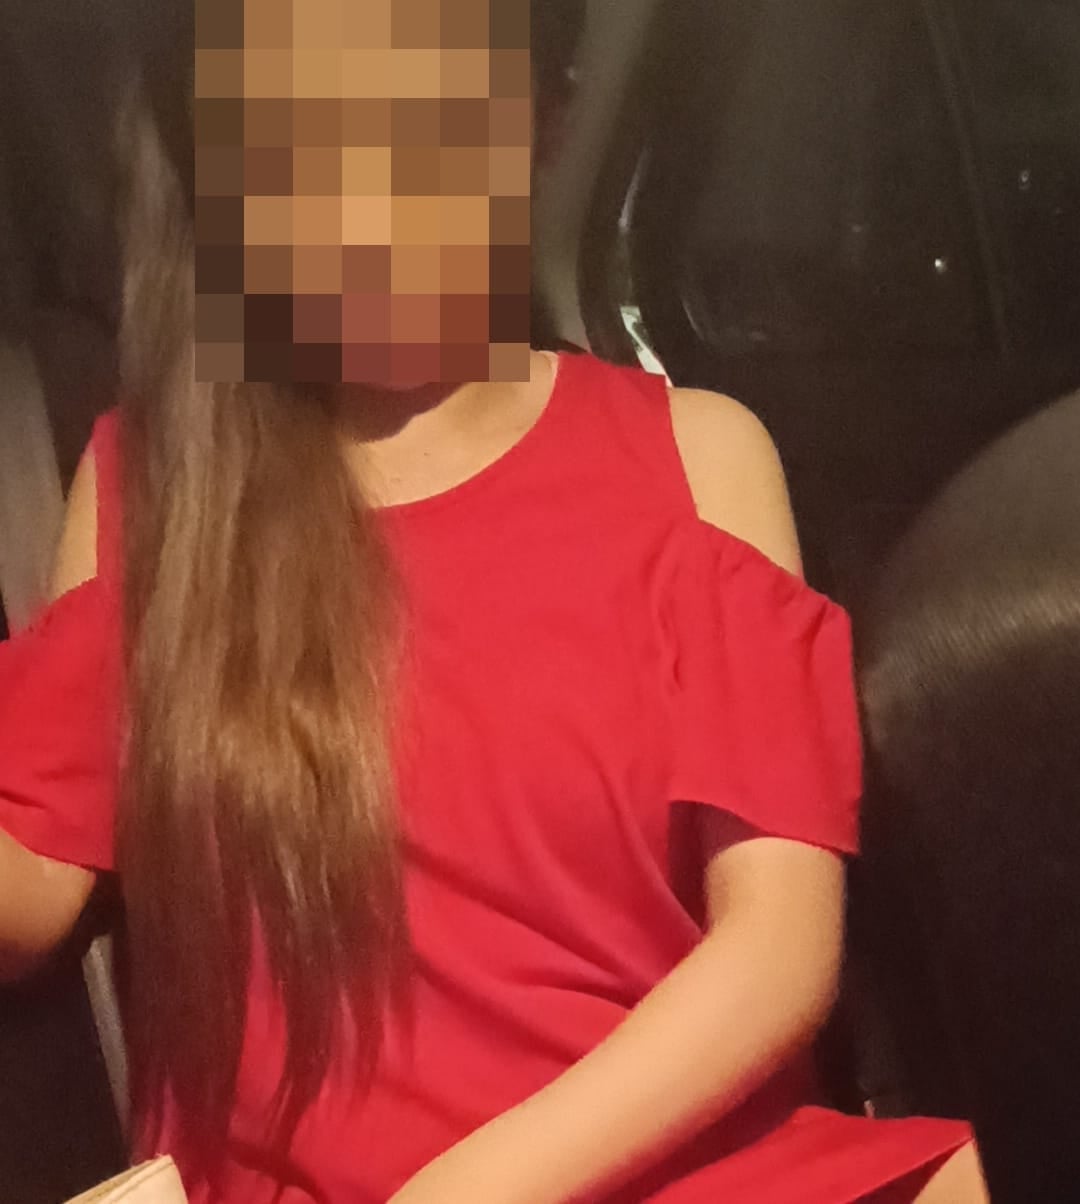 adeline change woman red dress scammed refused to pay driver fee